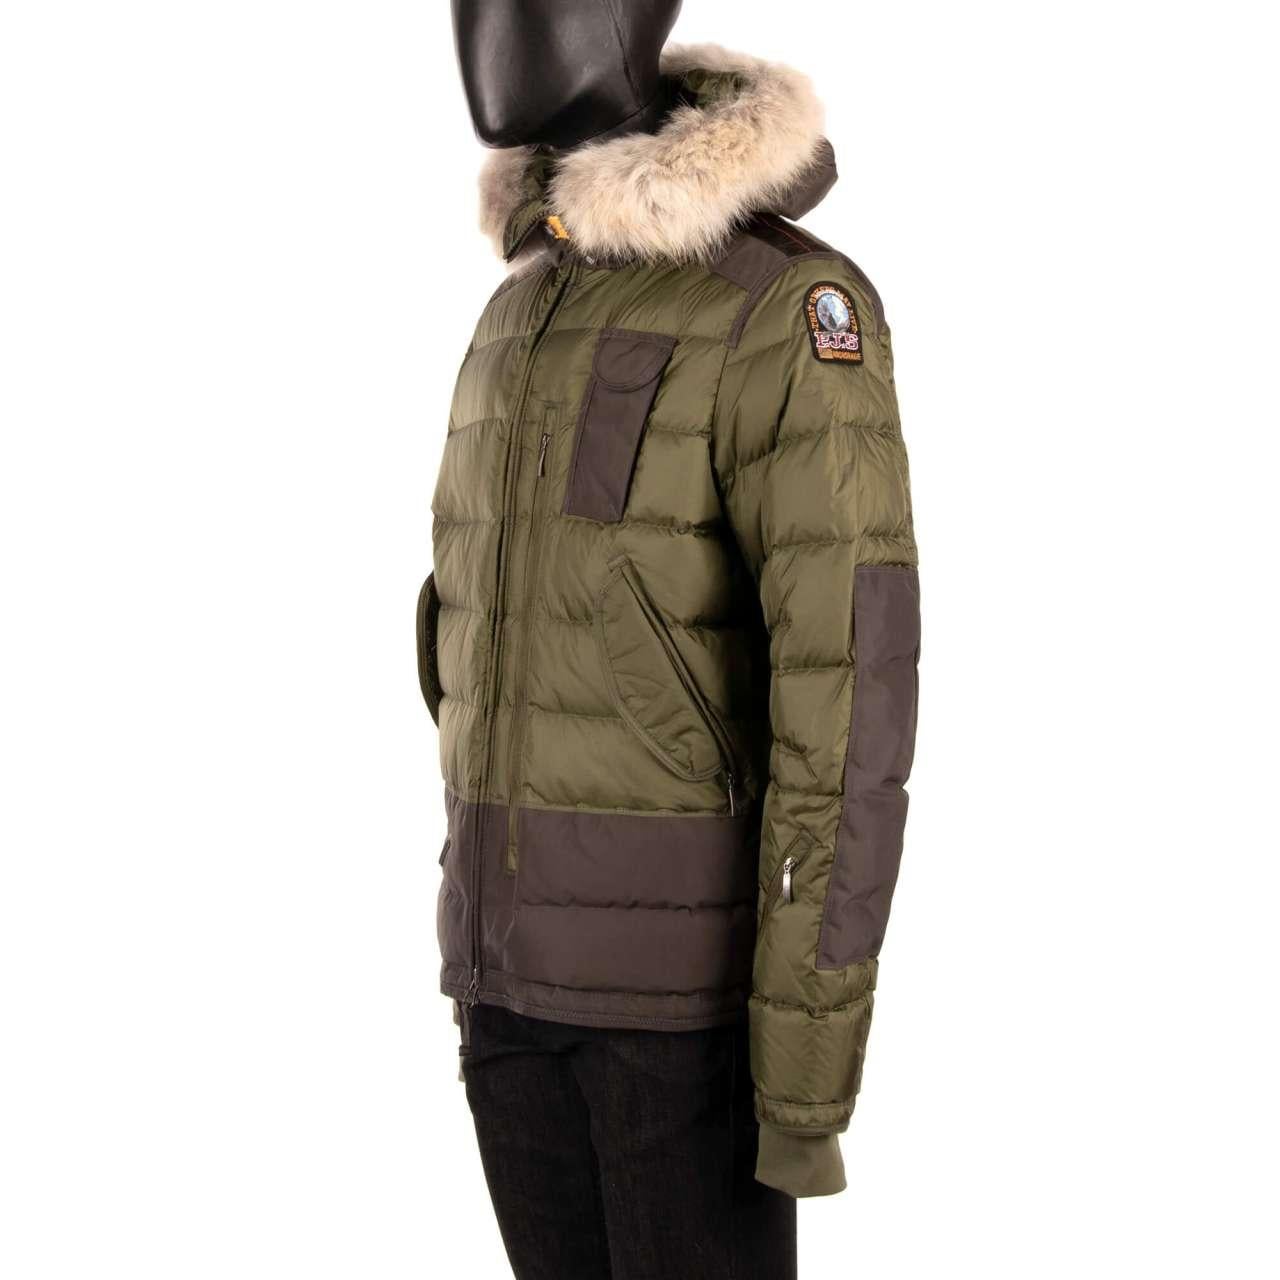 - Down filled Ski Jacket SKIMASTER made of nylon-polyurethane taffeta  with a detachable real fur trim, hood and many pockets in Military Green / Khaki - Mountain Series - New with tags - Former RRP: 900 EUR - Slim Fit - Front closure with zip -